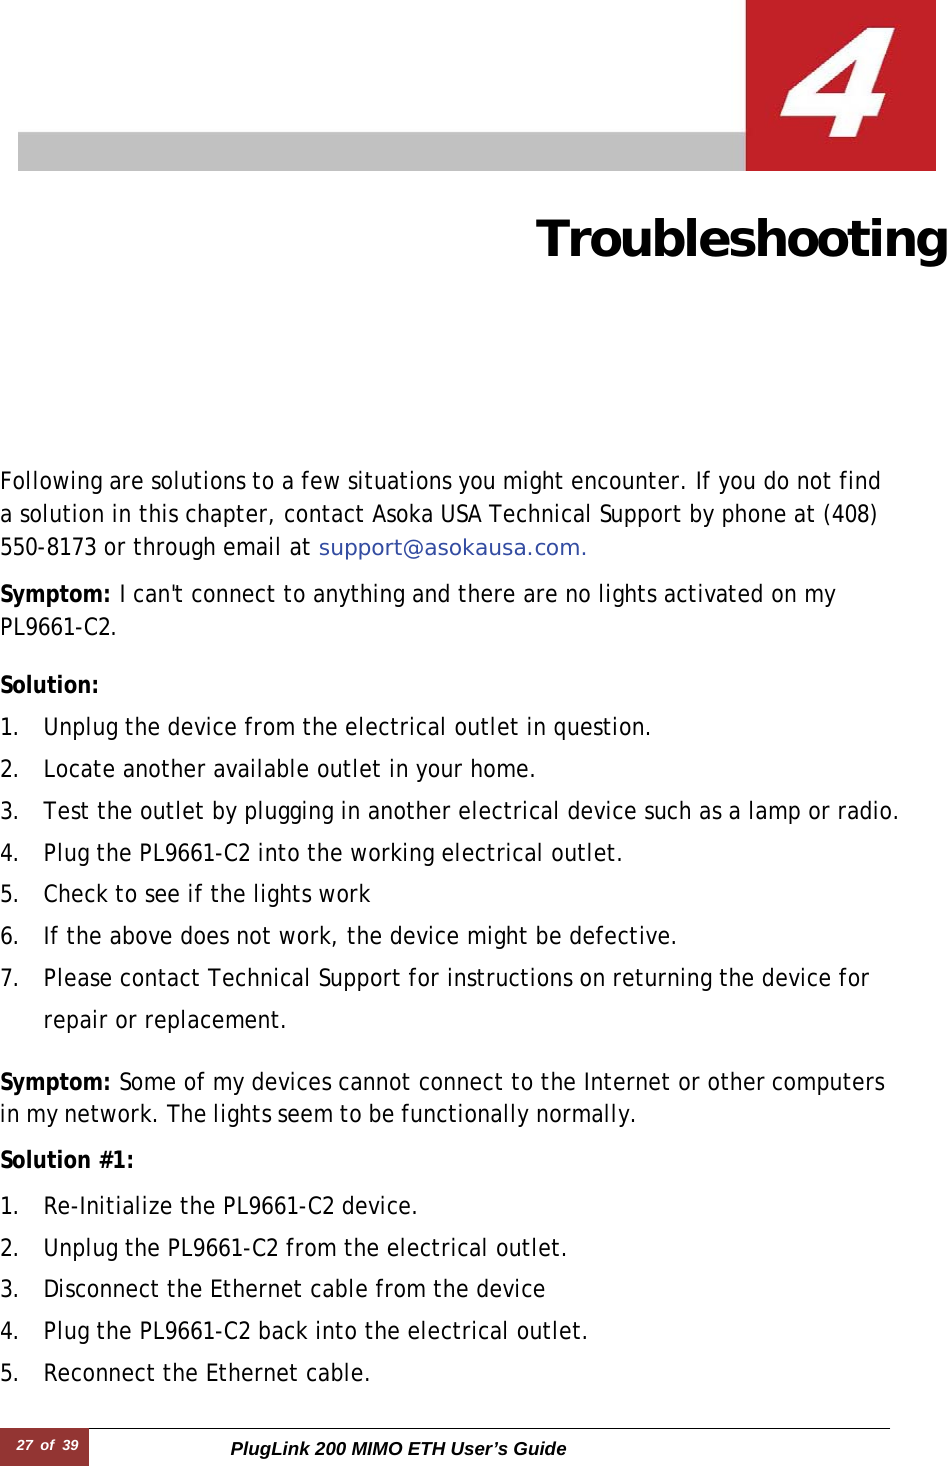 27  of  39 PlugLink 200 MIMO ETH User’s Guide  Troubleshooting   Following are solutions to a few situations you might encounter. If you do not find a solution in this chapter, contact Asoka USA Technical Support by phone at (408) 550-8173 or through email at support@asokausa.com.  Symptom: I can&apos;t connect to anything and there are no lights activated on my PL9661-C2.  Solution:  1. Unplug the device from the electrical outlet in question. 2. Locate another available outlet in your home. 3. Test the outlet by plugging in another electrical device such as a lamp or radio. 4. Plug the PL9661-C2 into the working electrical outlet. 5. Check to see if the lights work 6. If the above does not work, the device might be defective. 7. Please contact Technical Support for instructions on returning the device for repair or replacement.  Symptom: Some of my devices cannot connect to the Internet or other computers in my network. The lights seem to be functionally normally.  Solution #1:  1. Re-Initialize the PL9661-C2 device. 2. Unplug the PL9661-C2 from the electrical outlet. 3. Disconnect the Ethernet cable from the device 4. Plug the PL9661-C2 back into the electrical outlet. 5. Reconnect the Ethernet cable. 